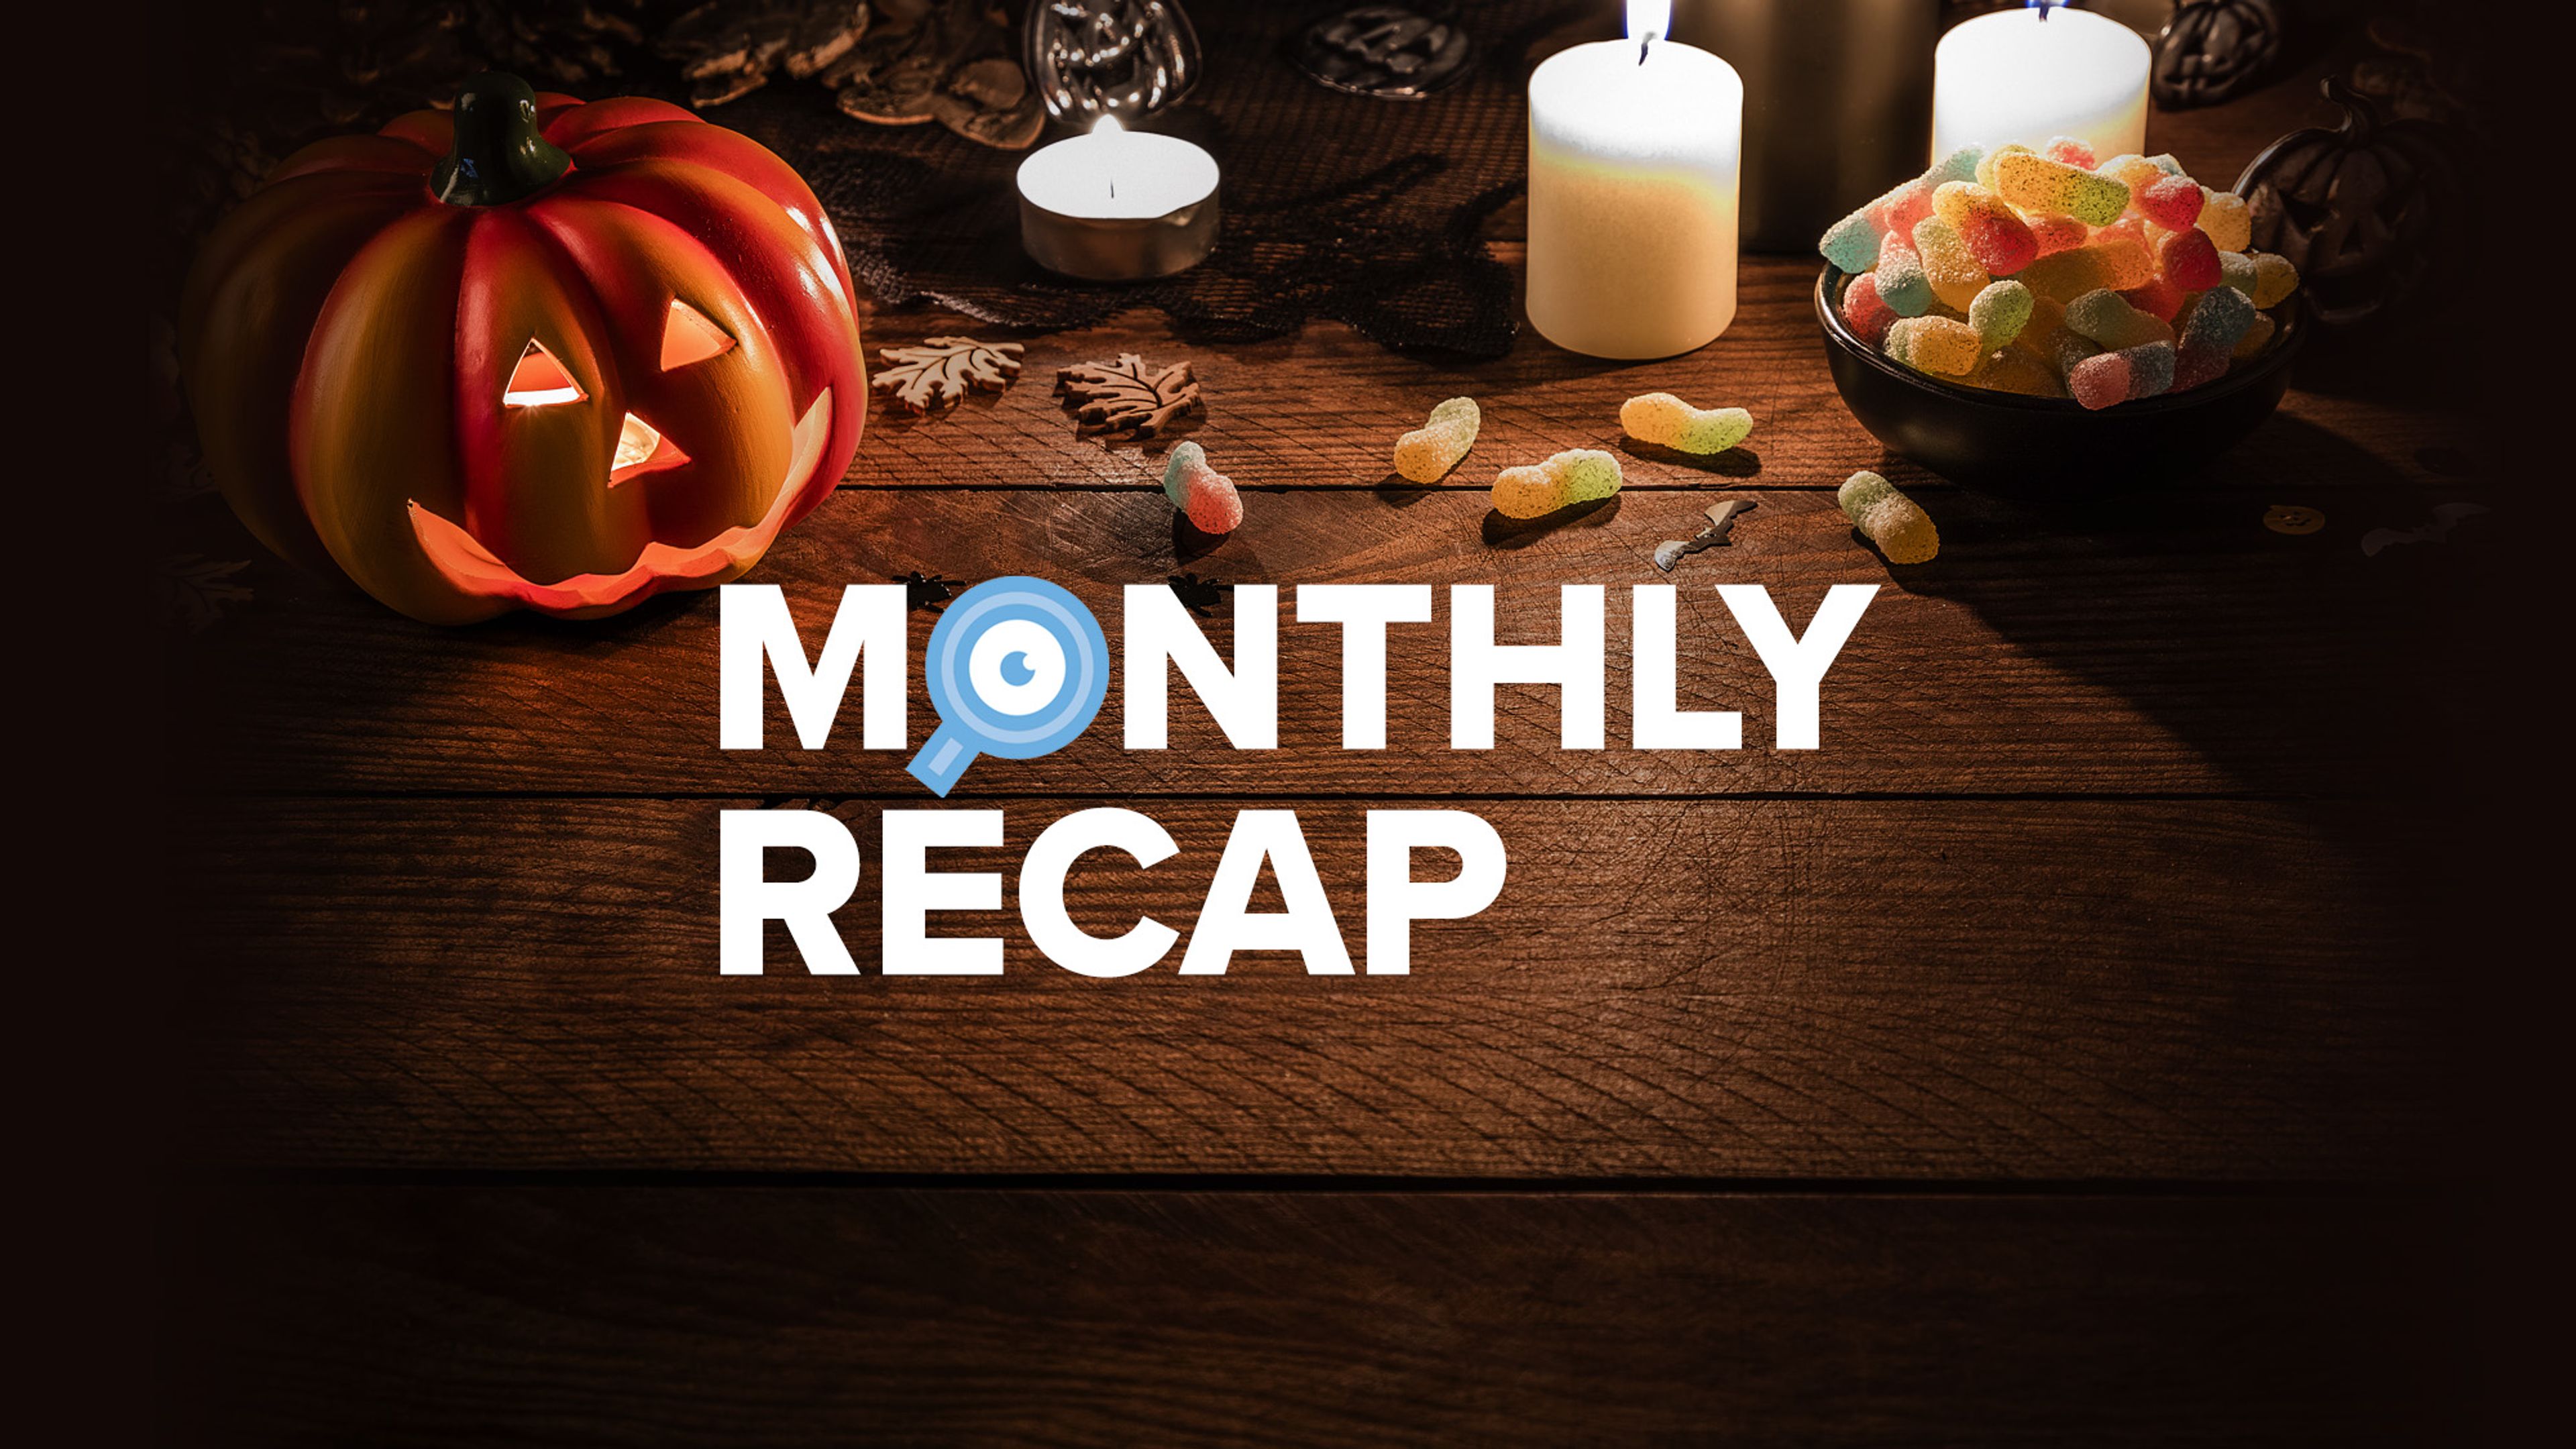 Featured image of CMS Critic Monthly Recap logo with background of Halloween decorations and jack-o-lantern